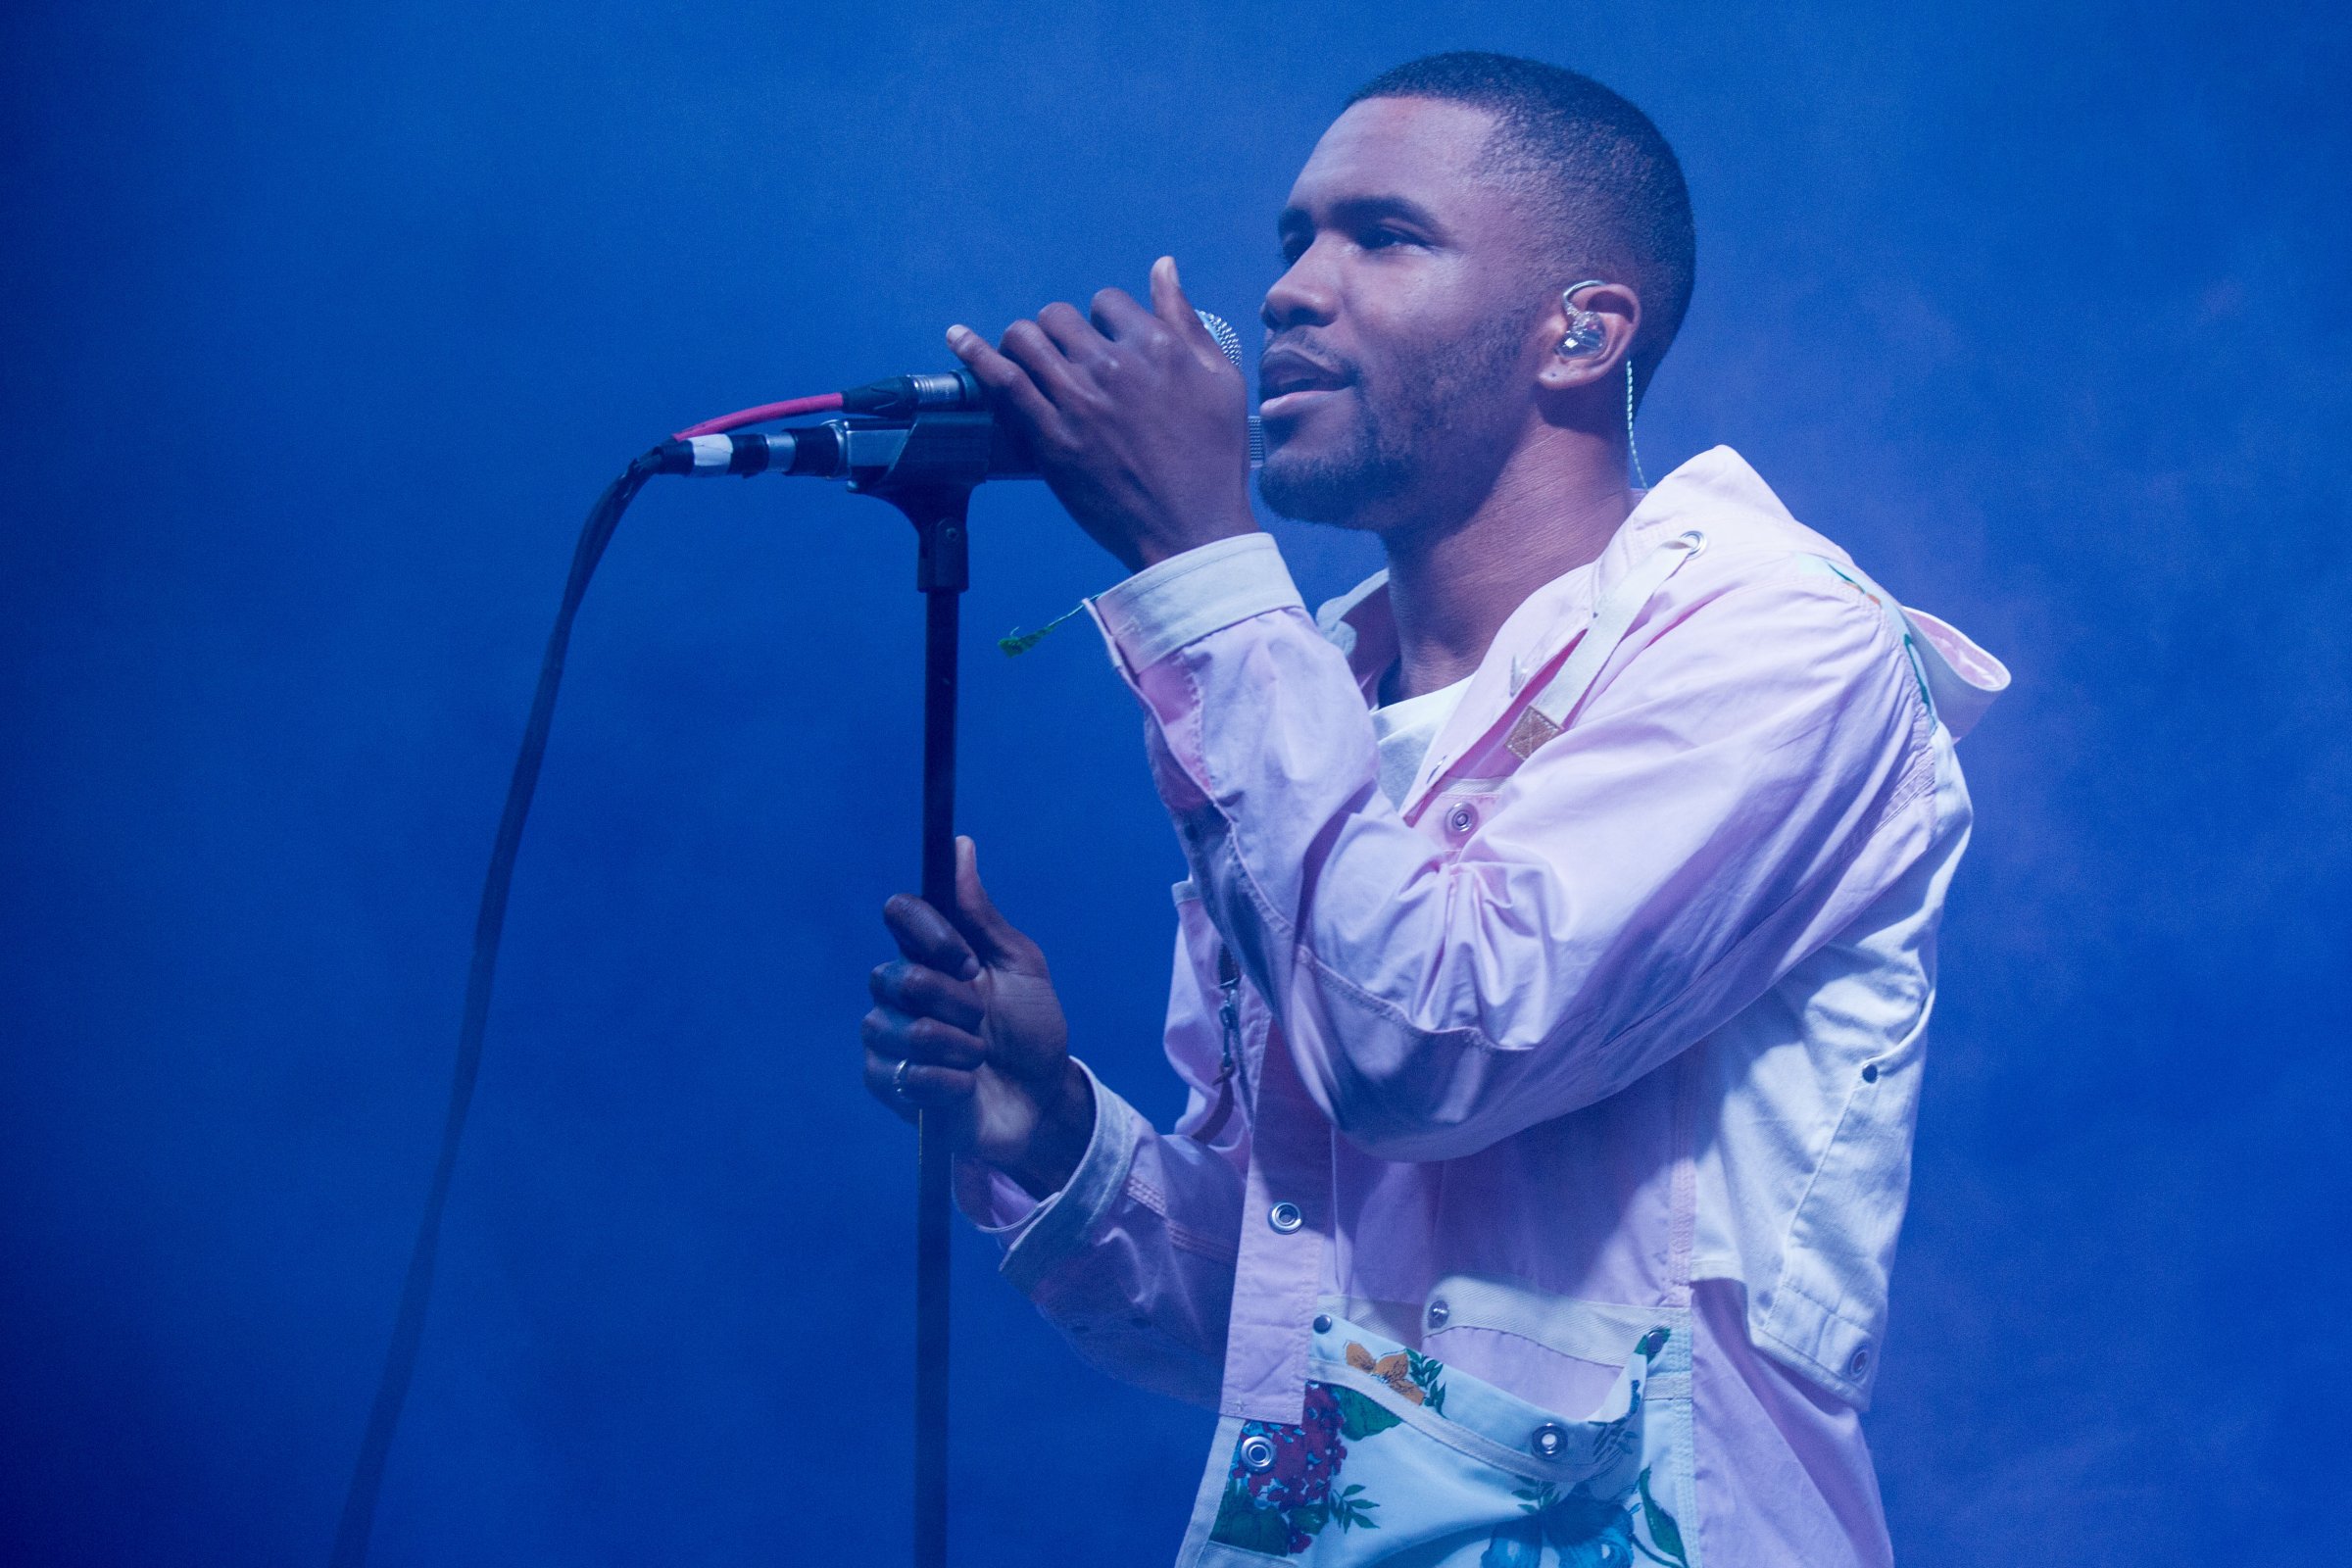 Rapper FRANK OCEAN performs live at the 2014 Bonnaroo Music and Arts Festival in Manchester, Tennessee on June 14, 2014.